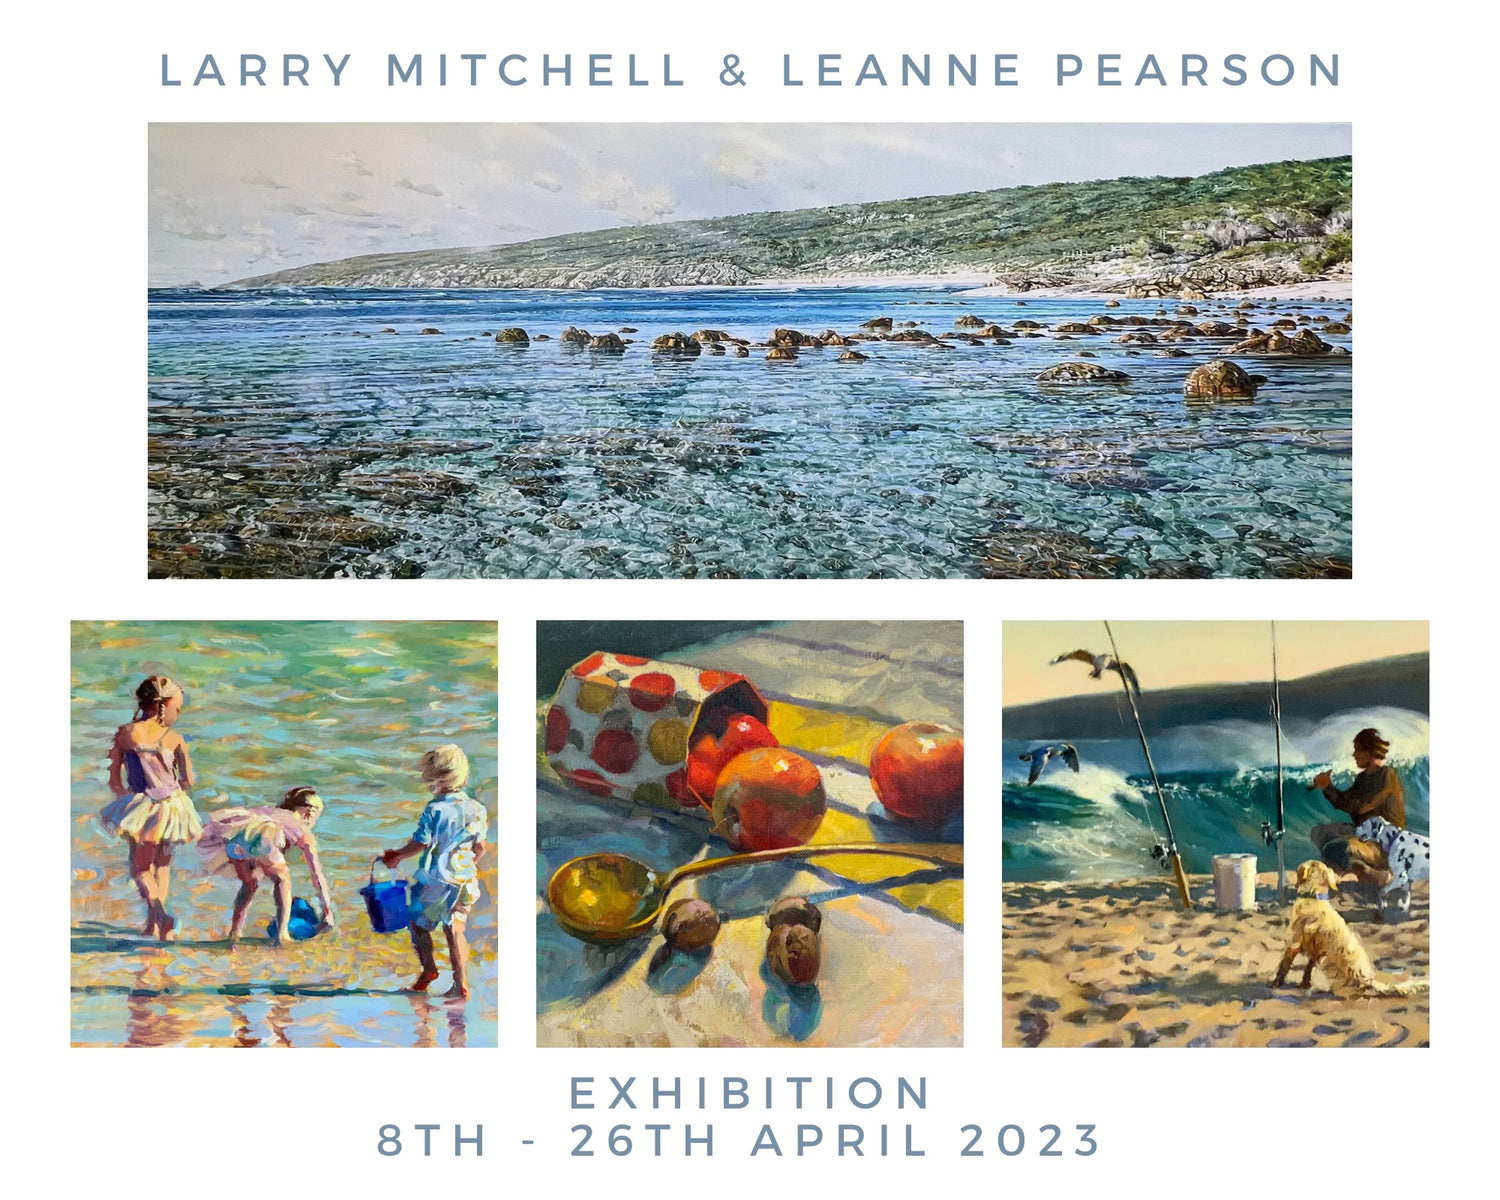 Larry Mitchell and Leanne Pearson: Sat 8th - Wed 26th April